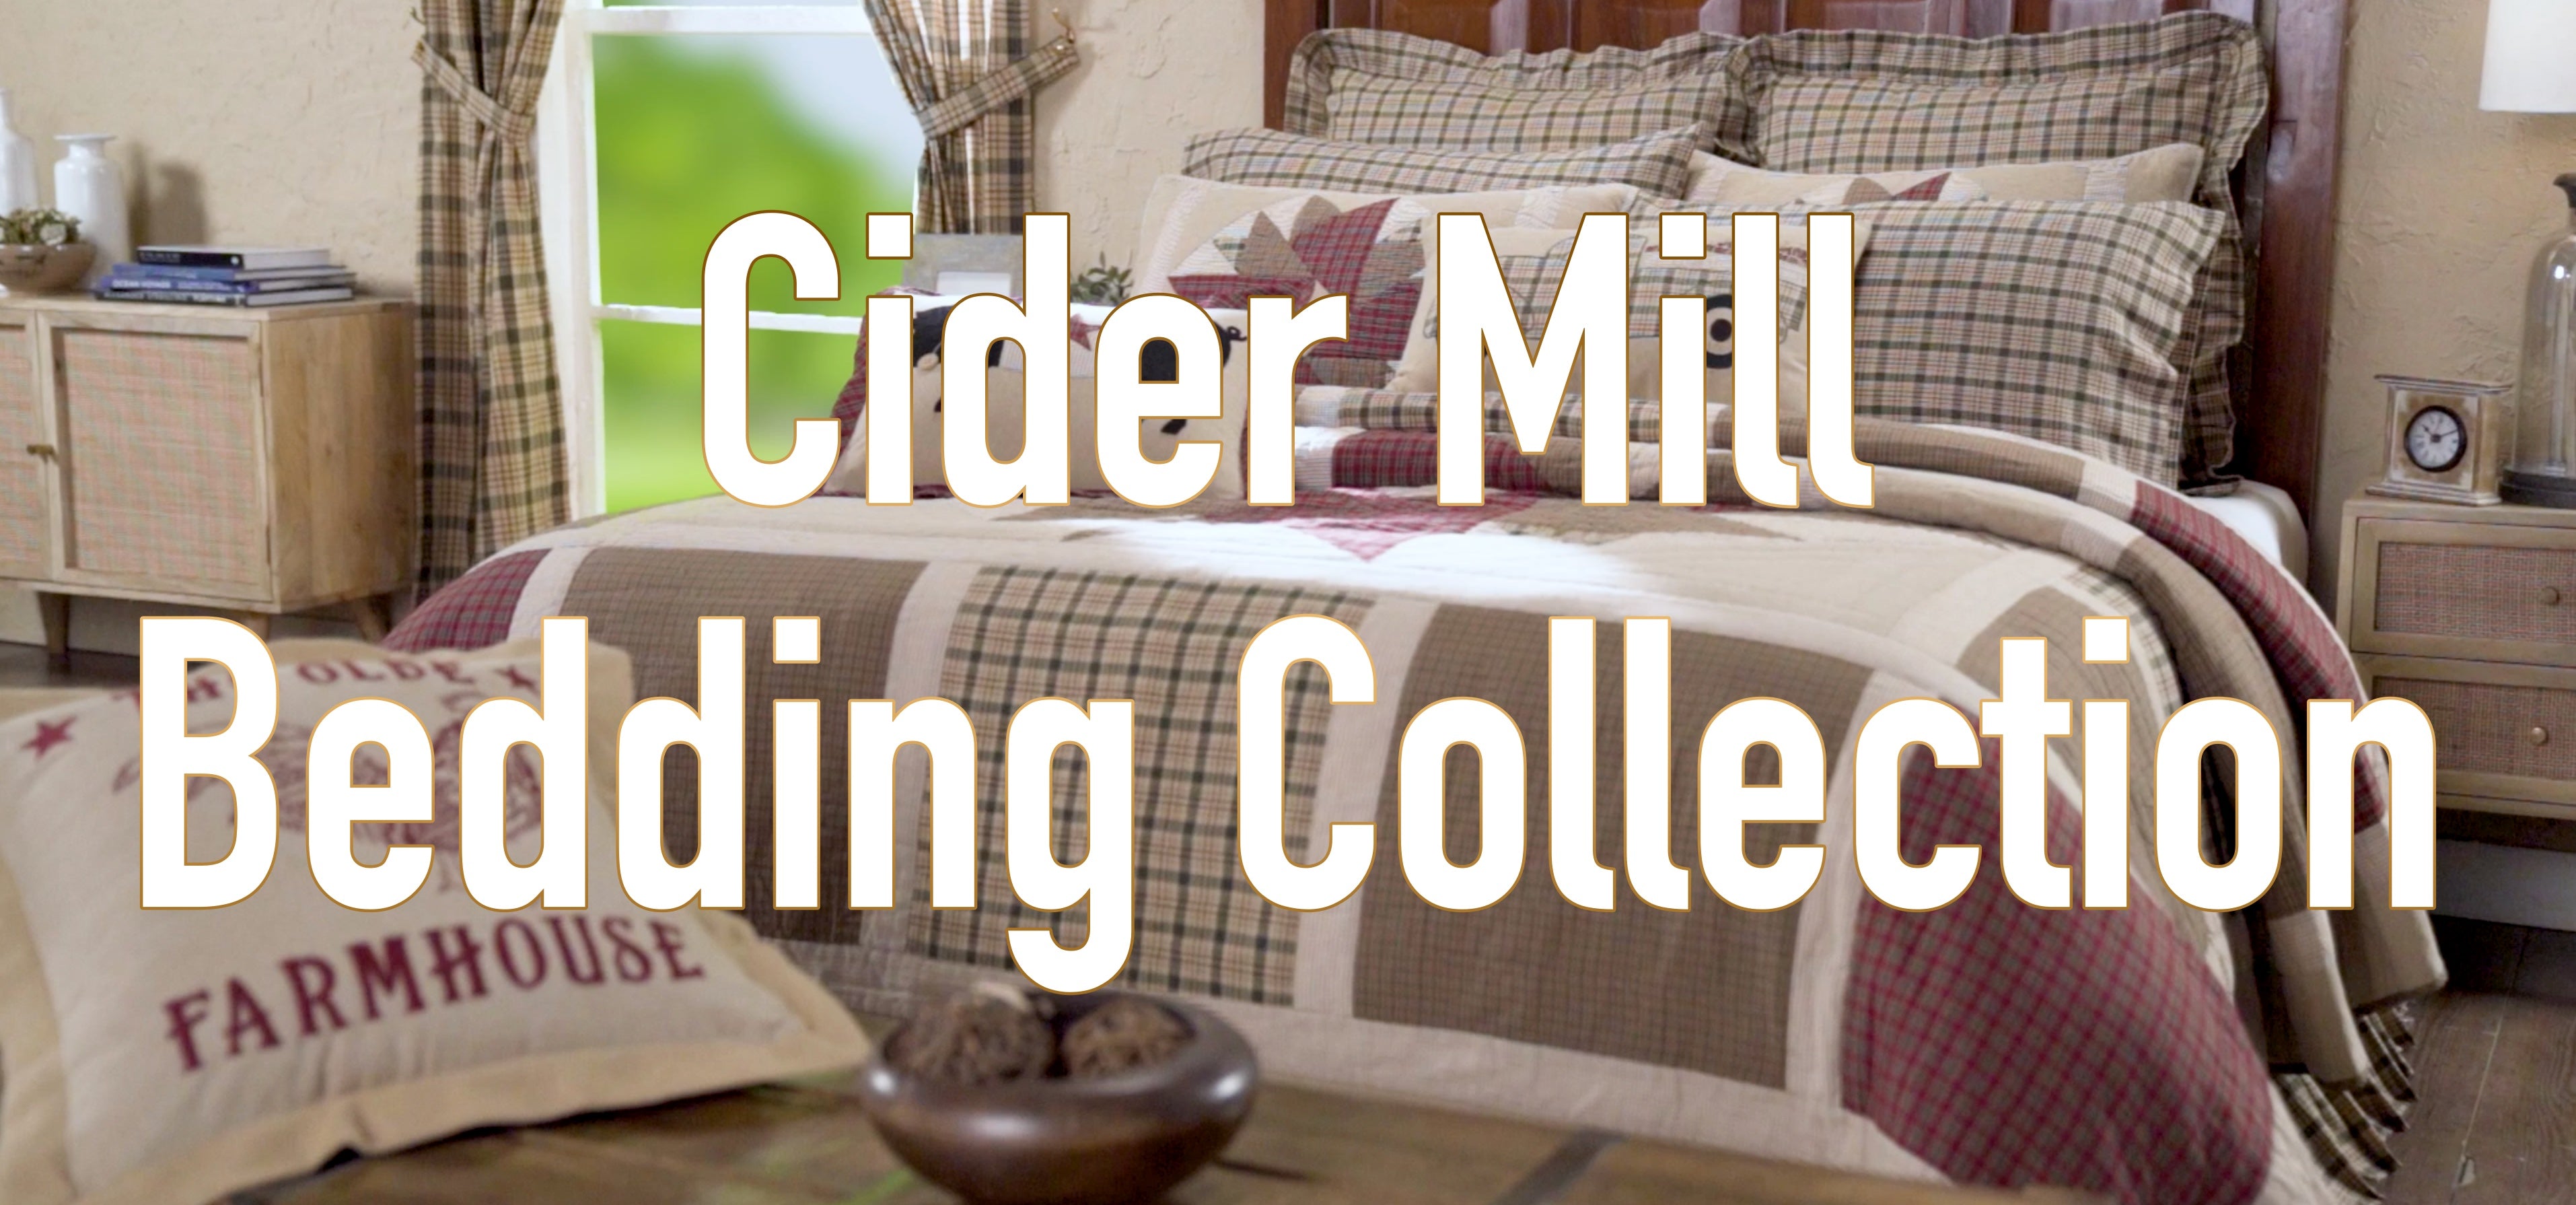 Cider Mill Bedding Collection